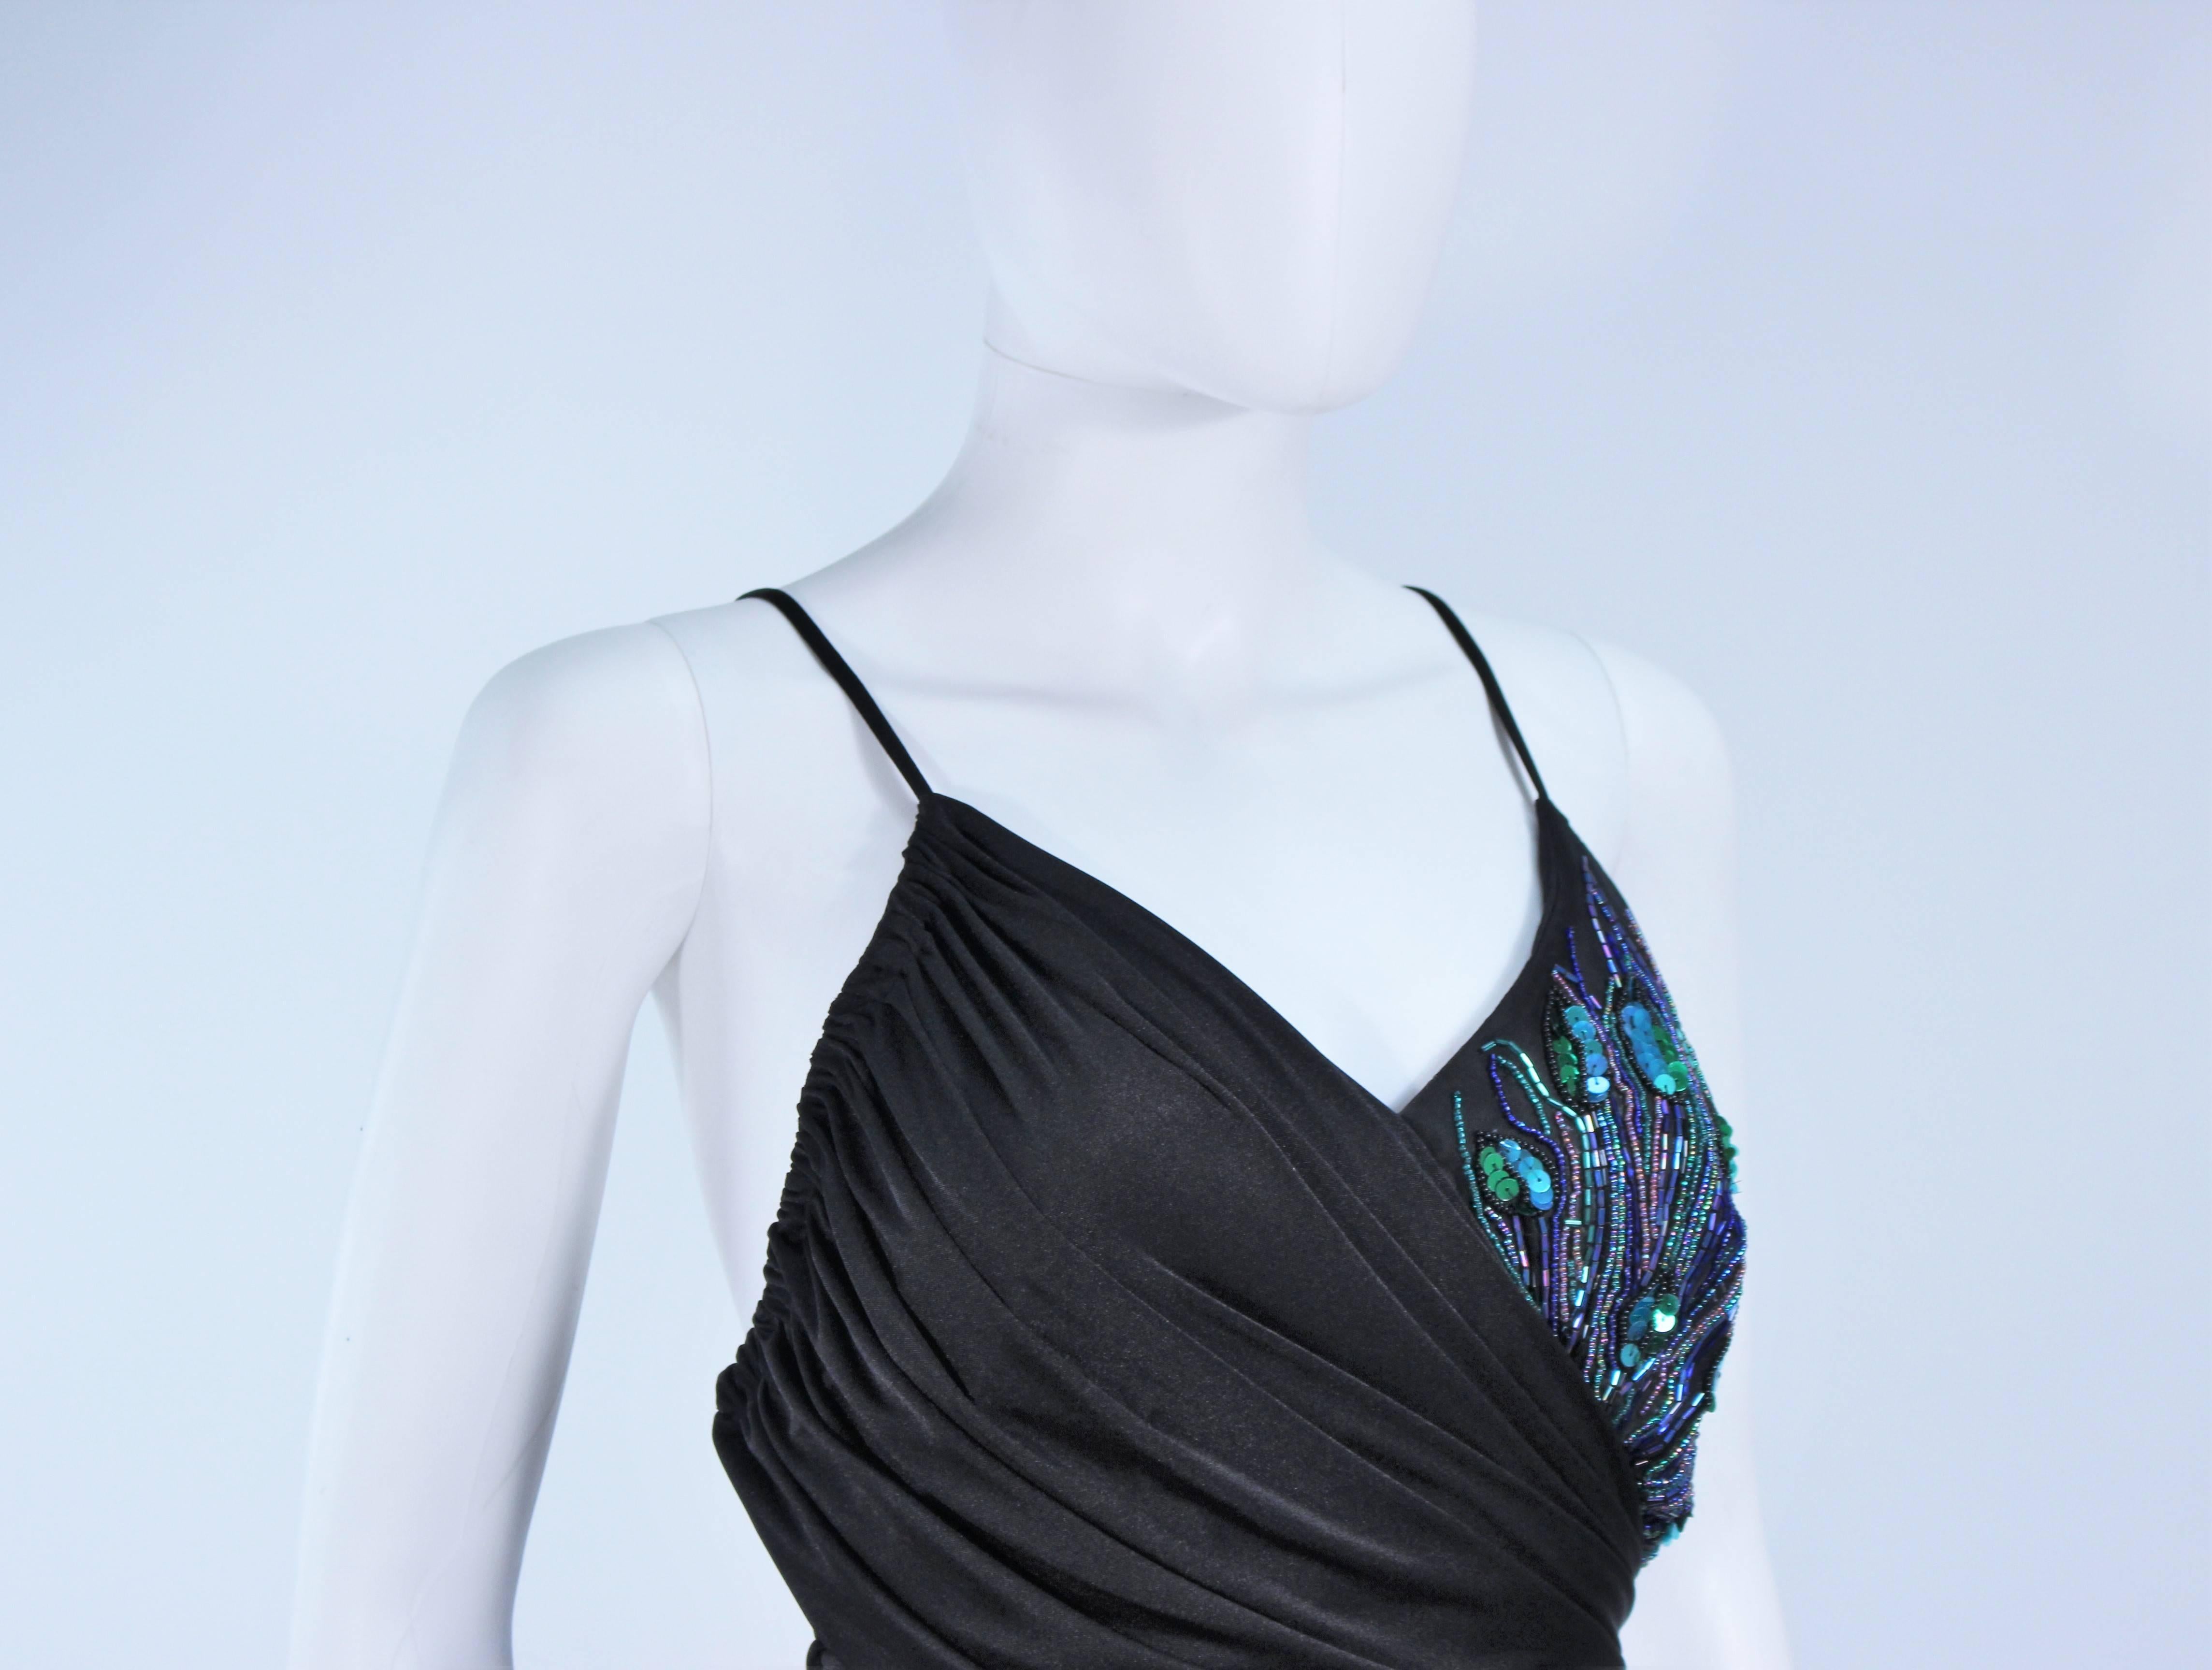 ABBEY KENT Black Draped Jersey Cocktail Dress with Iridescent Sequin Applique 10 For Sale 3